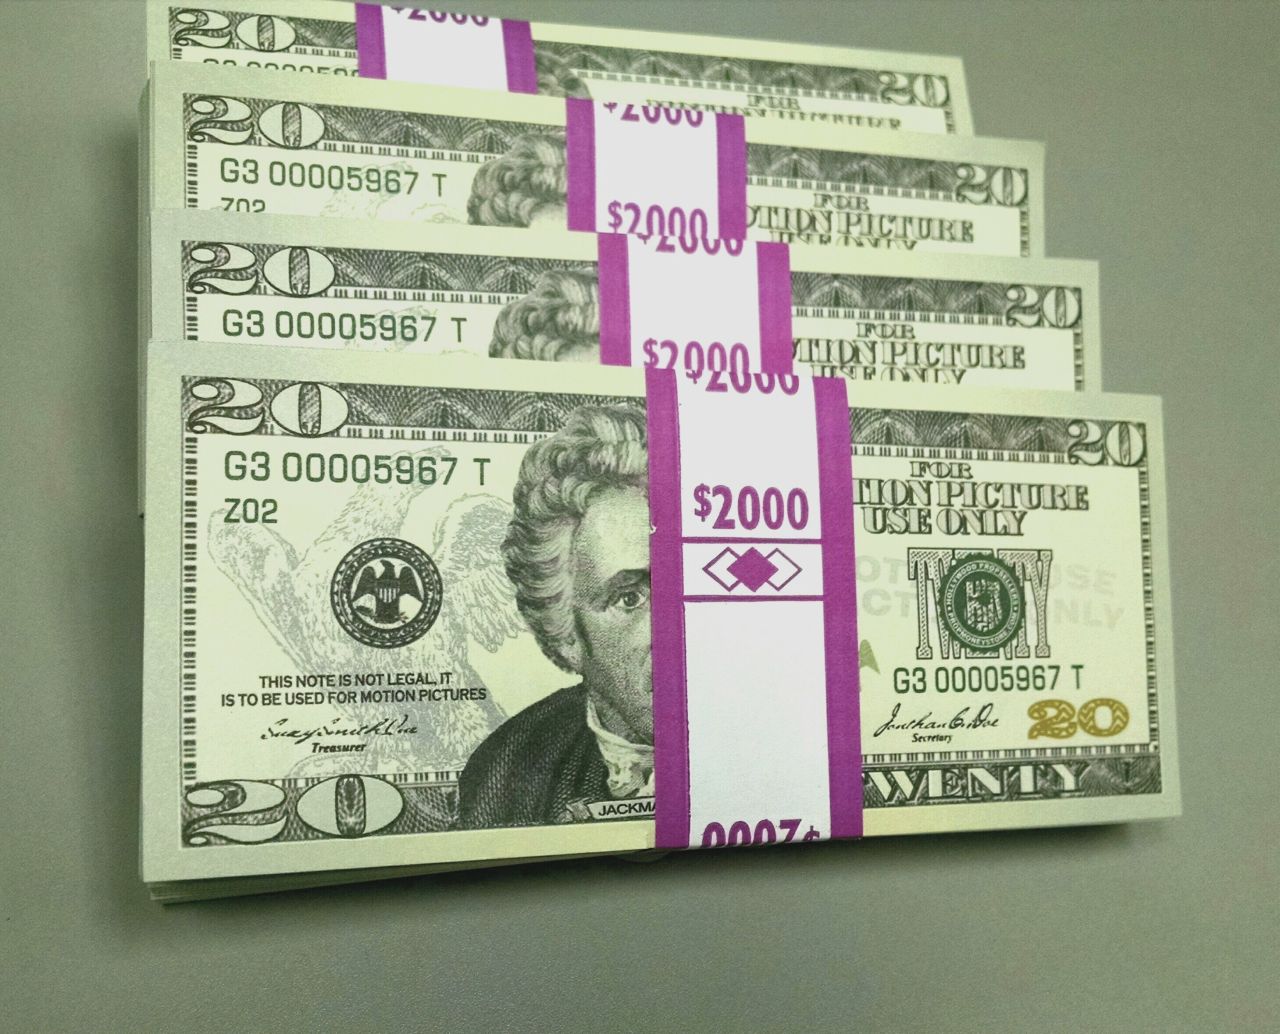 Both old style and new style bills are on offer. Prices range from $45 to $65 per stack of 100 bills.